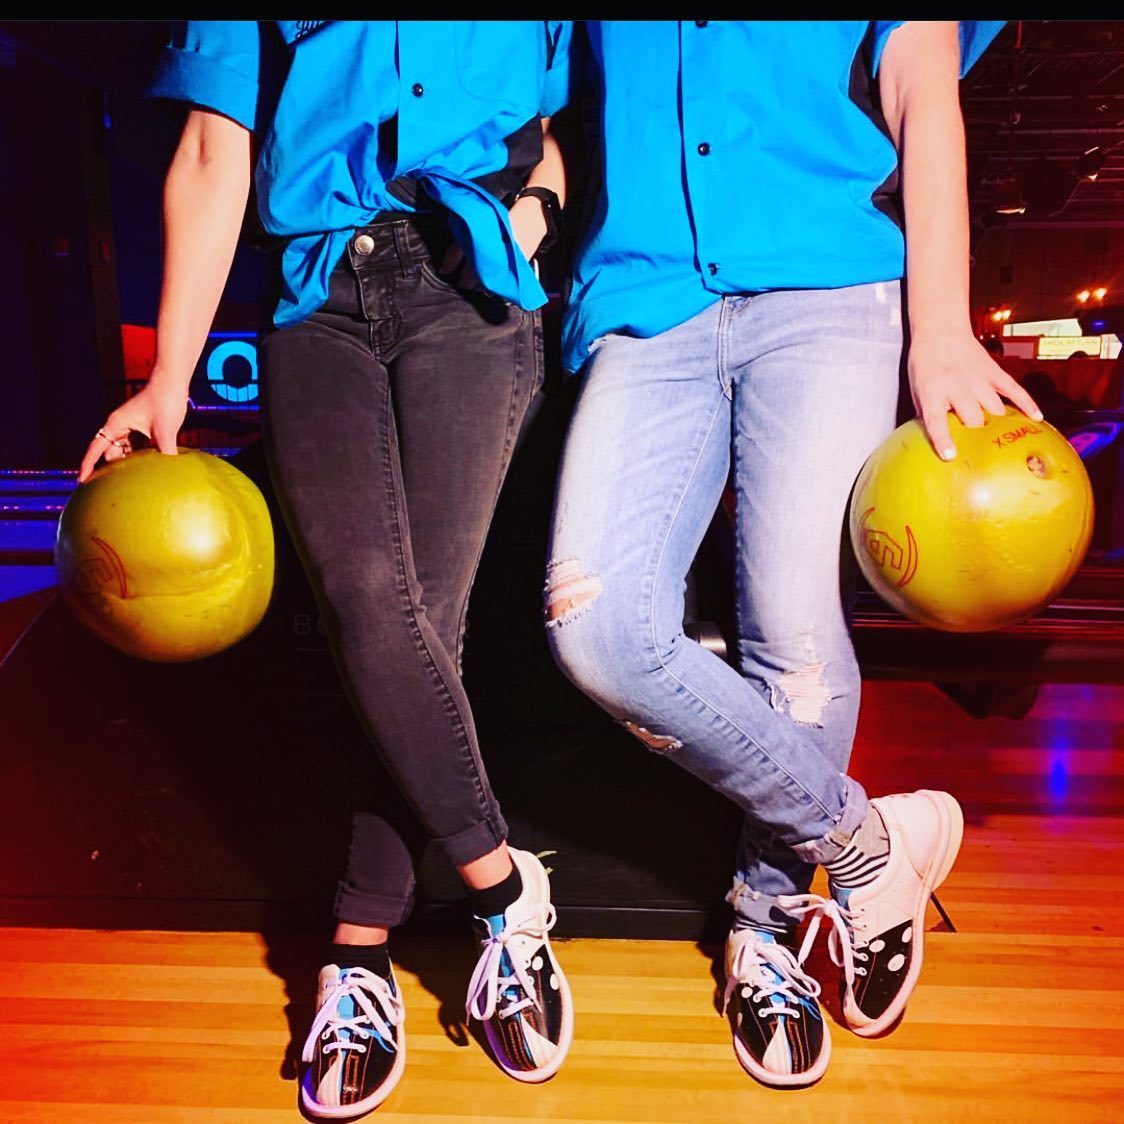 Two people wearing bowling shoes and holding bowling balls